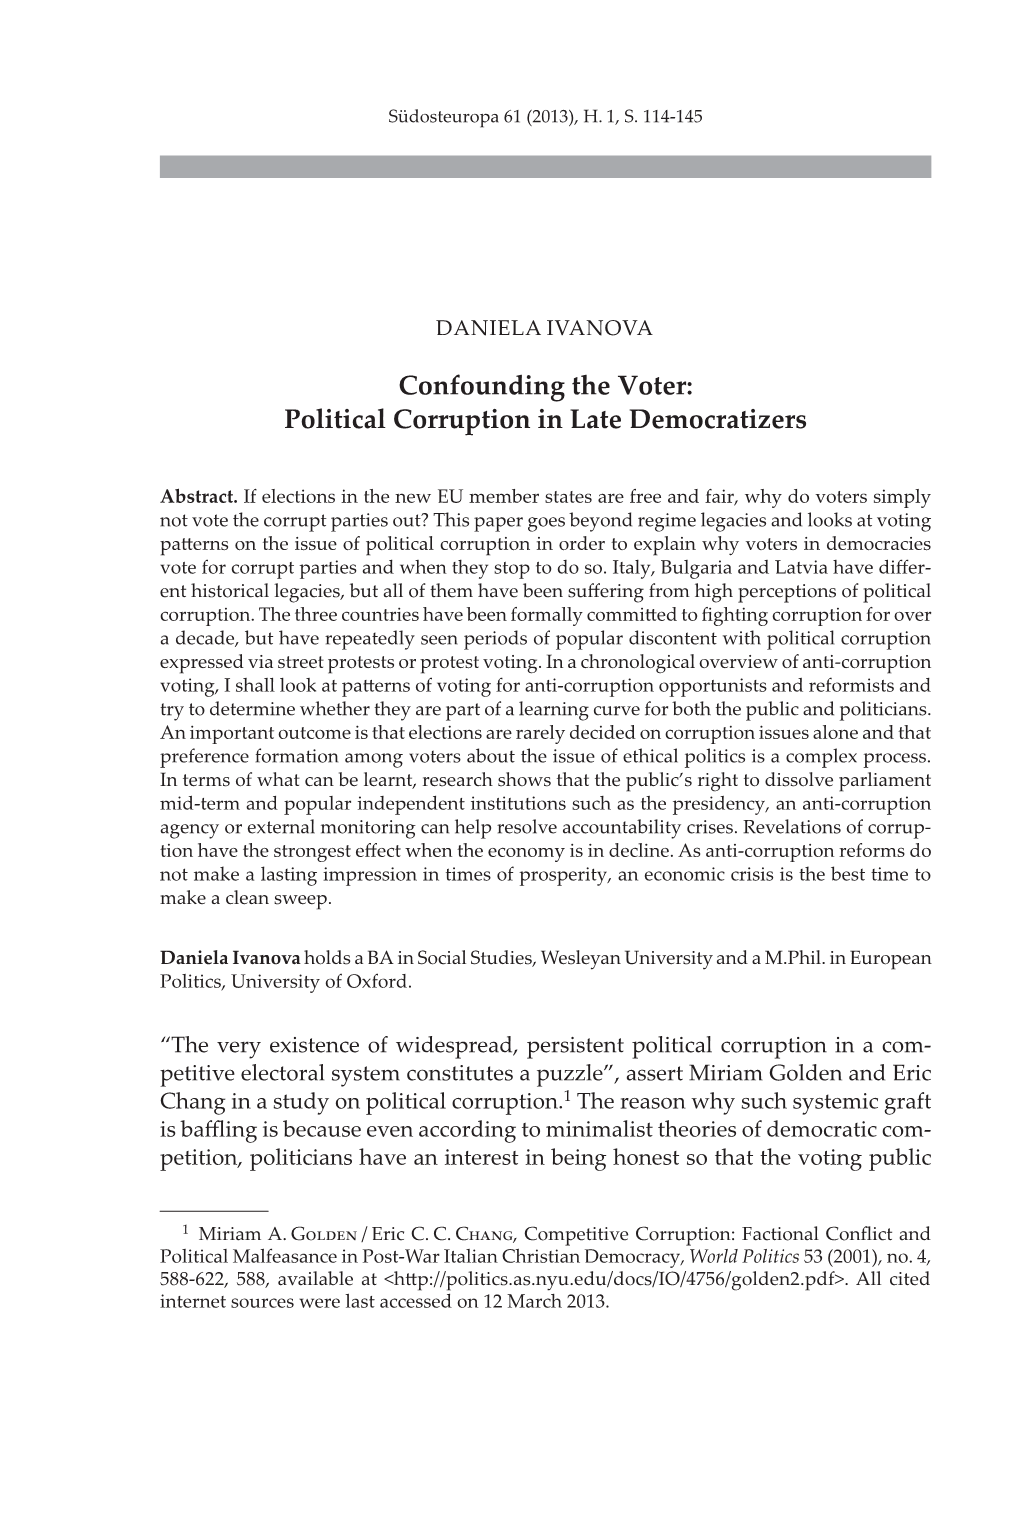 Confounding the Voter: Political Corruption in Late Democratizers